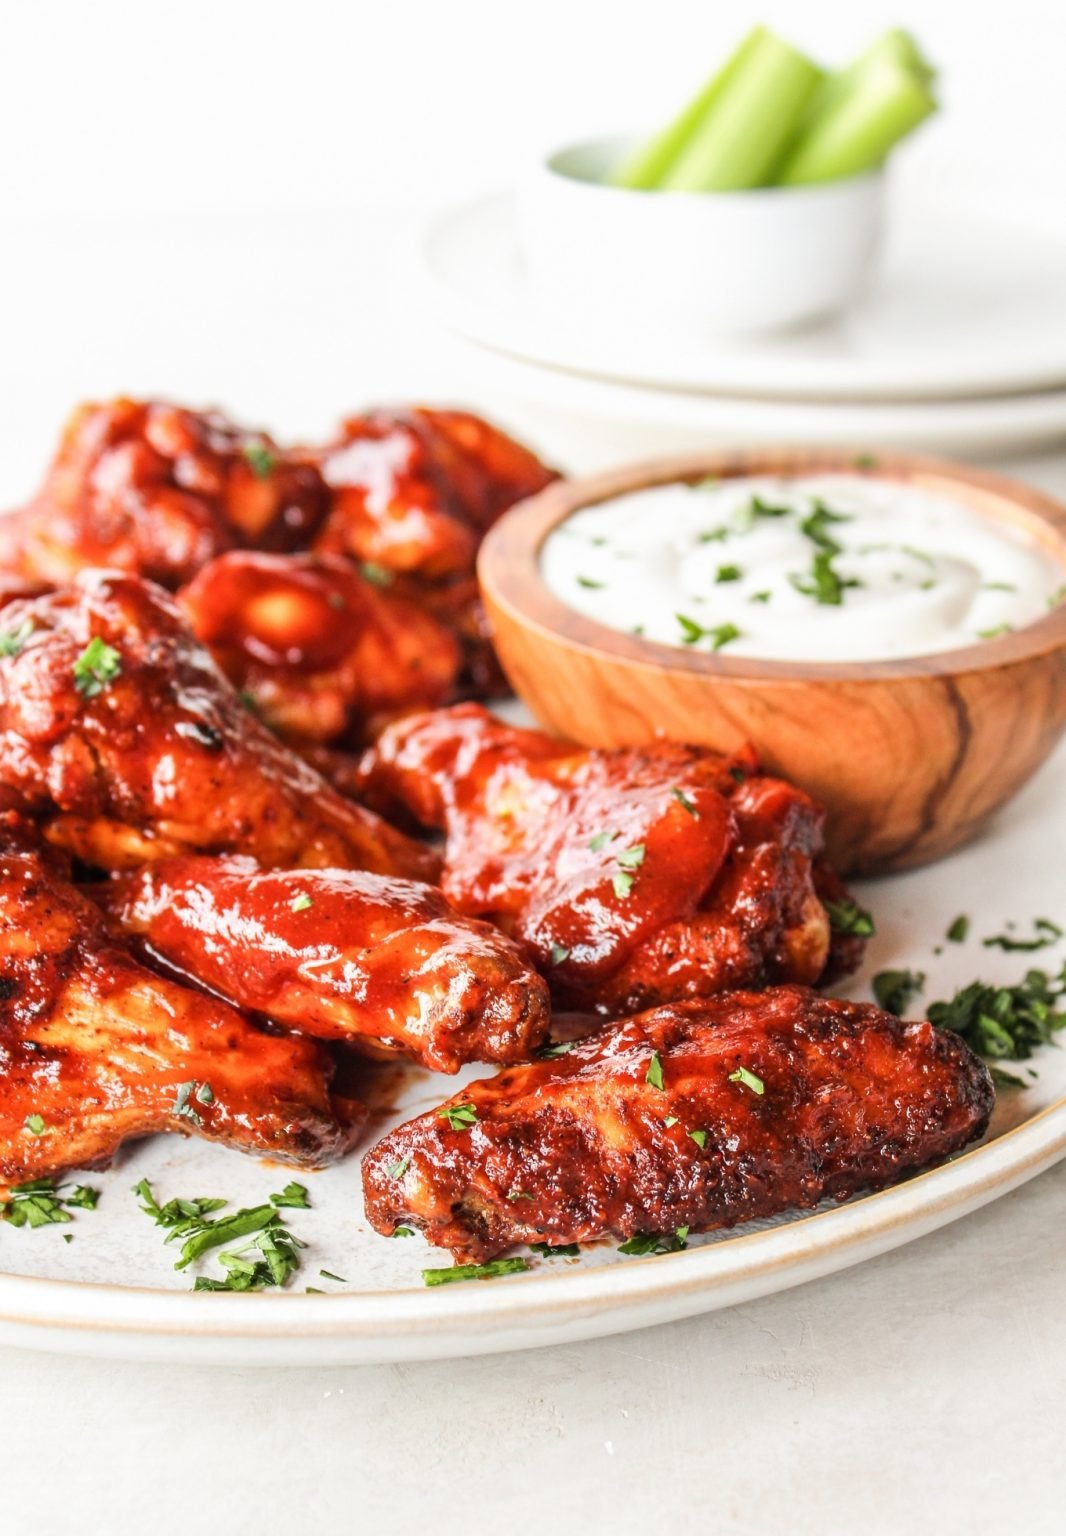 Baked Barbecue Chicken Wings - The Whole Cook